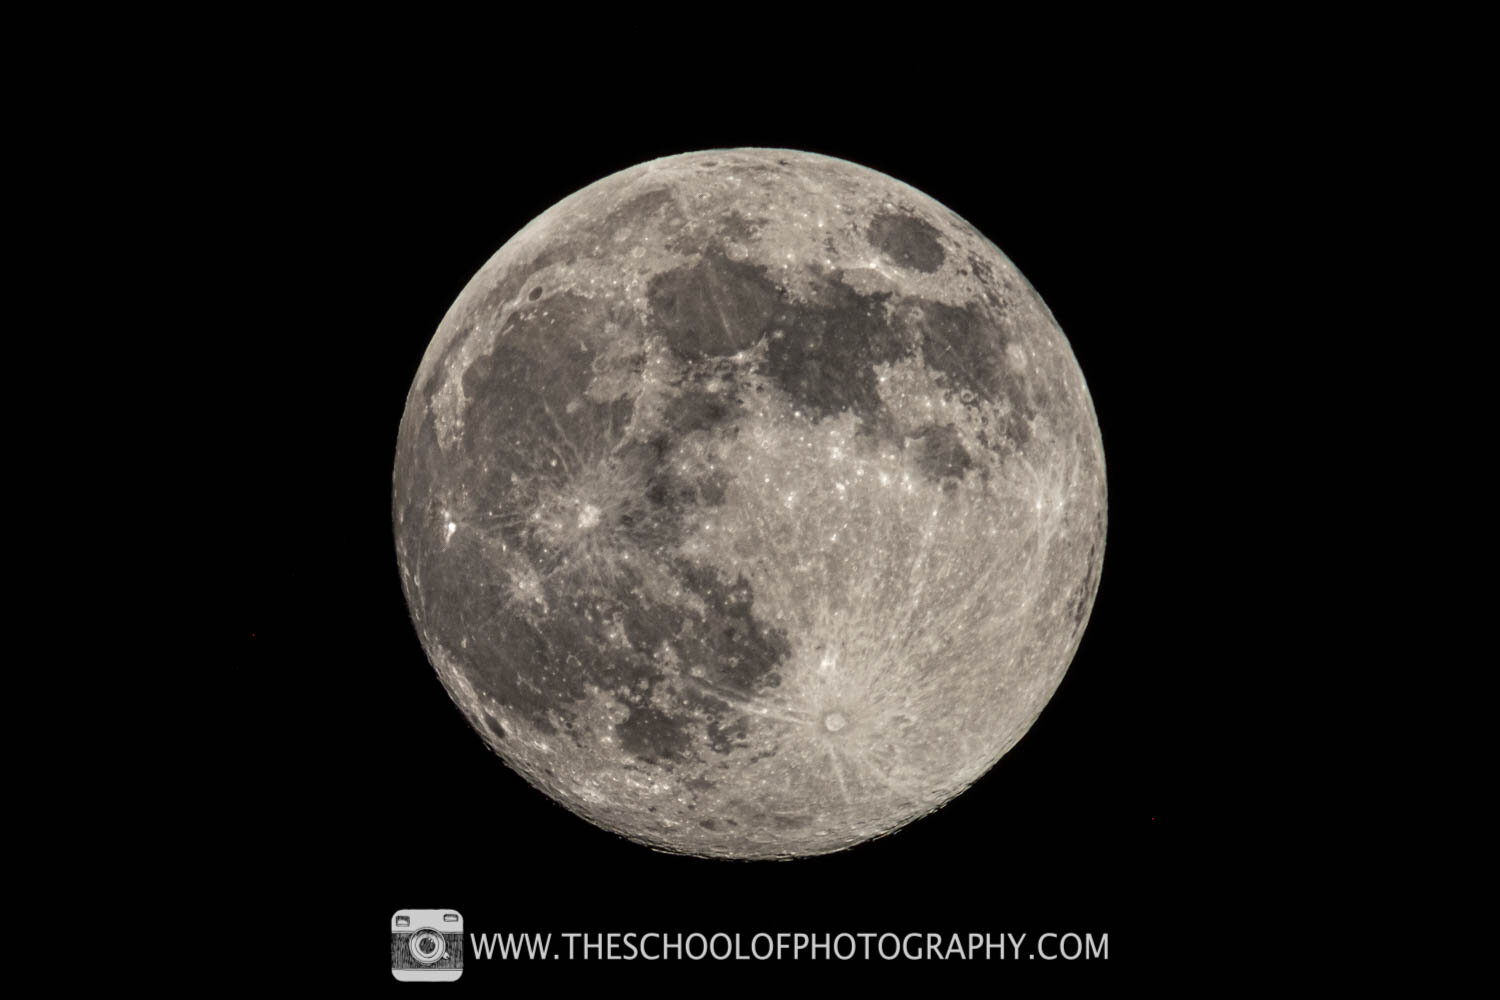 Best focal length for moon photography